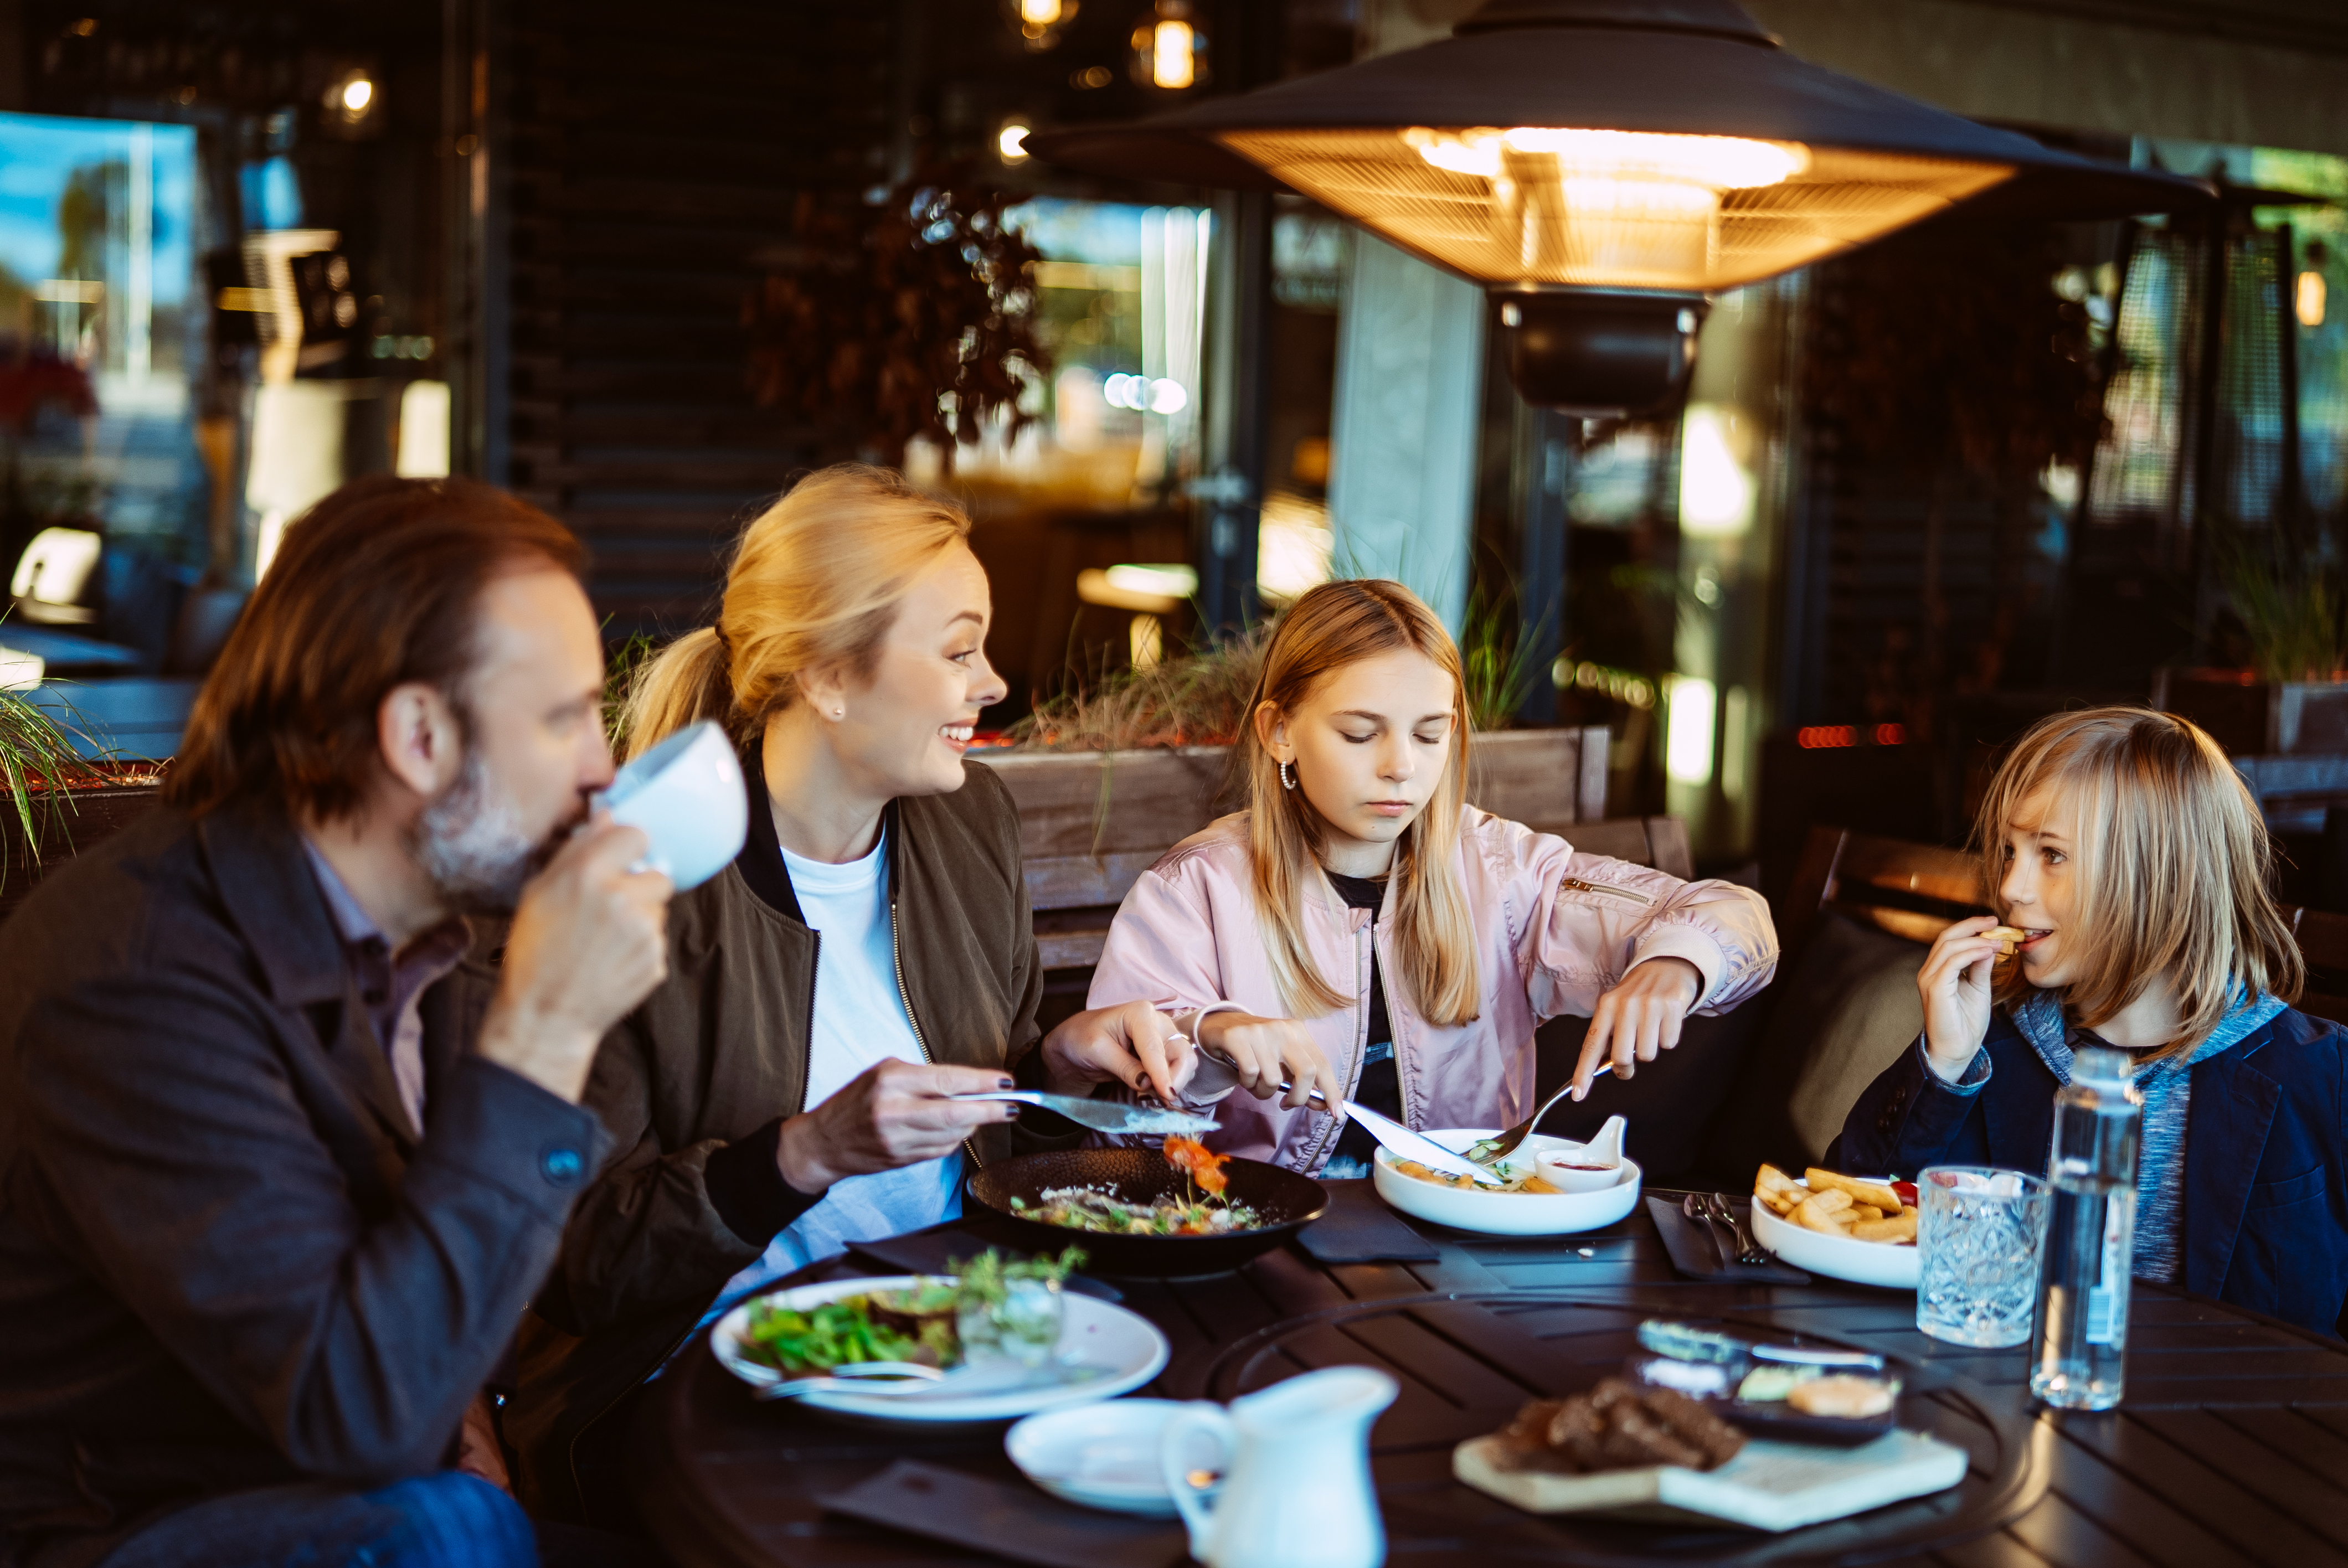 Mom, dad, son and daughter eat at a restaurant in Estonia